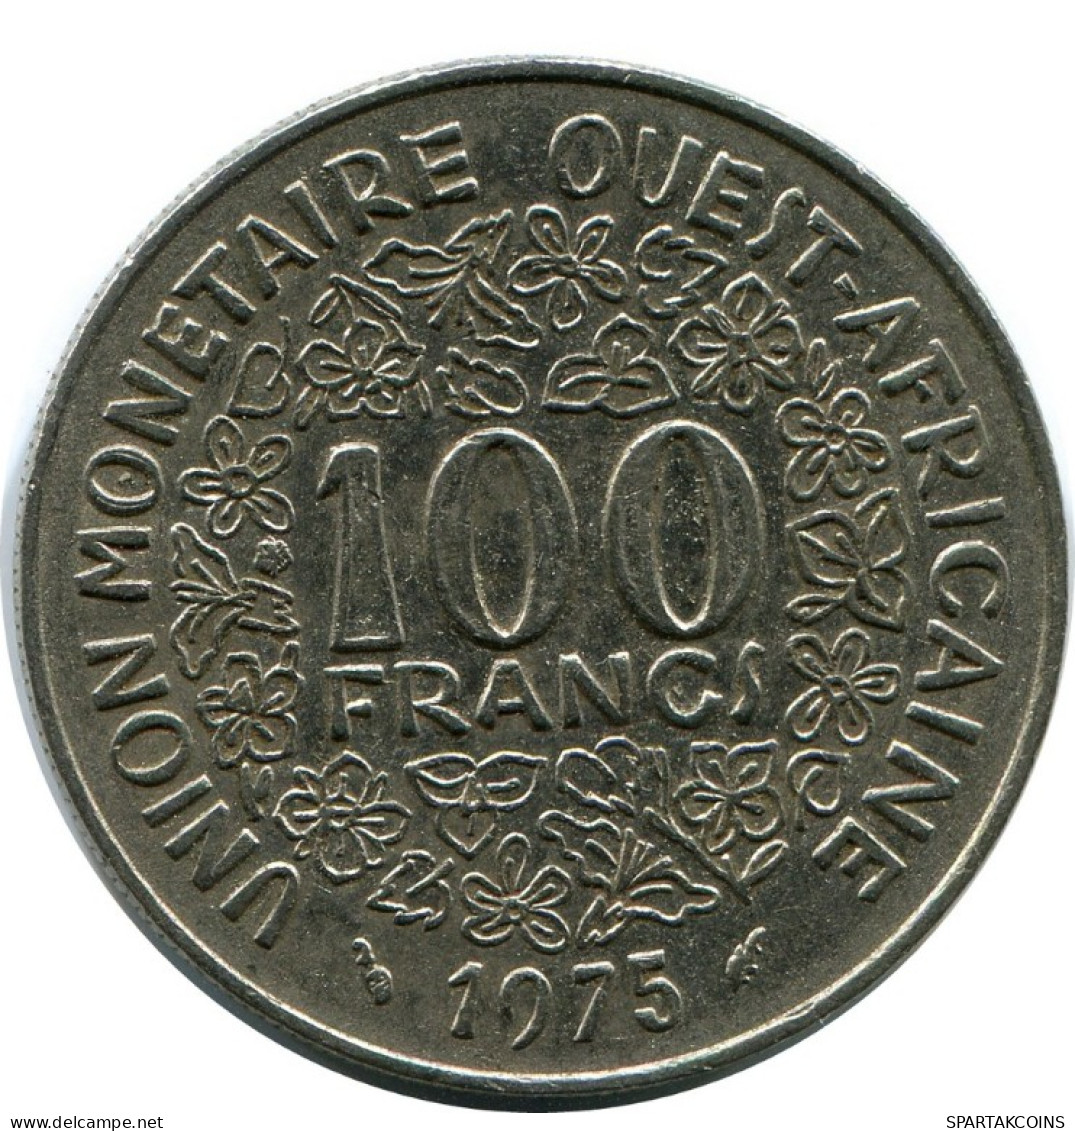 100 FRANCS 1975 WESTERN AFRICAN STATES Coin #AH629.3.U.A - Other - Africa